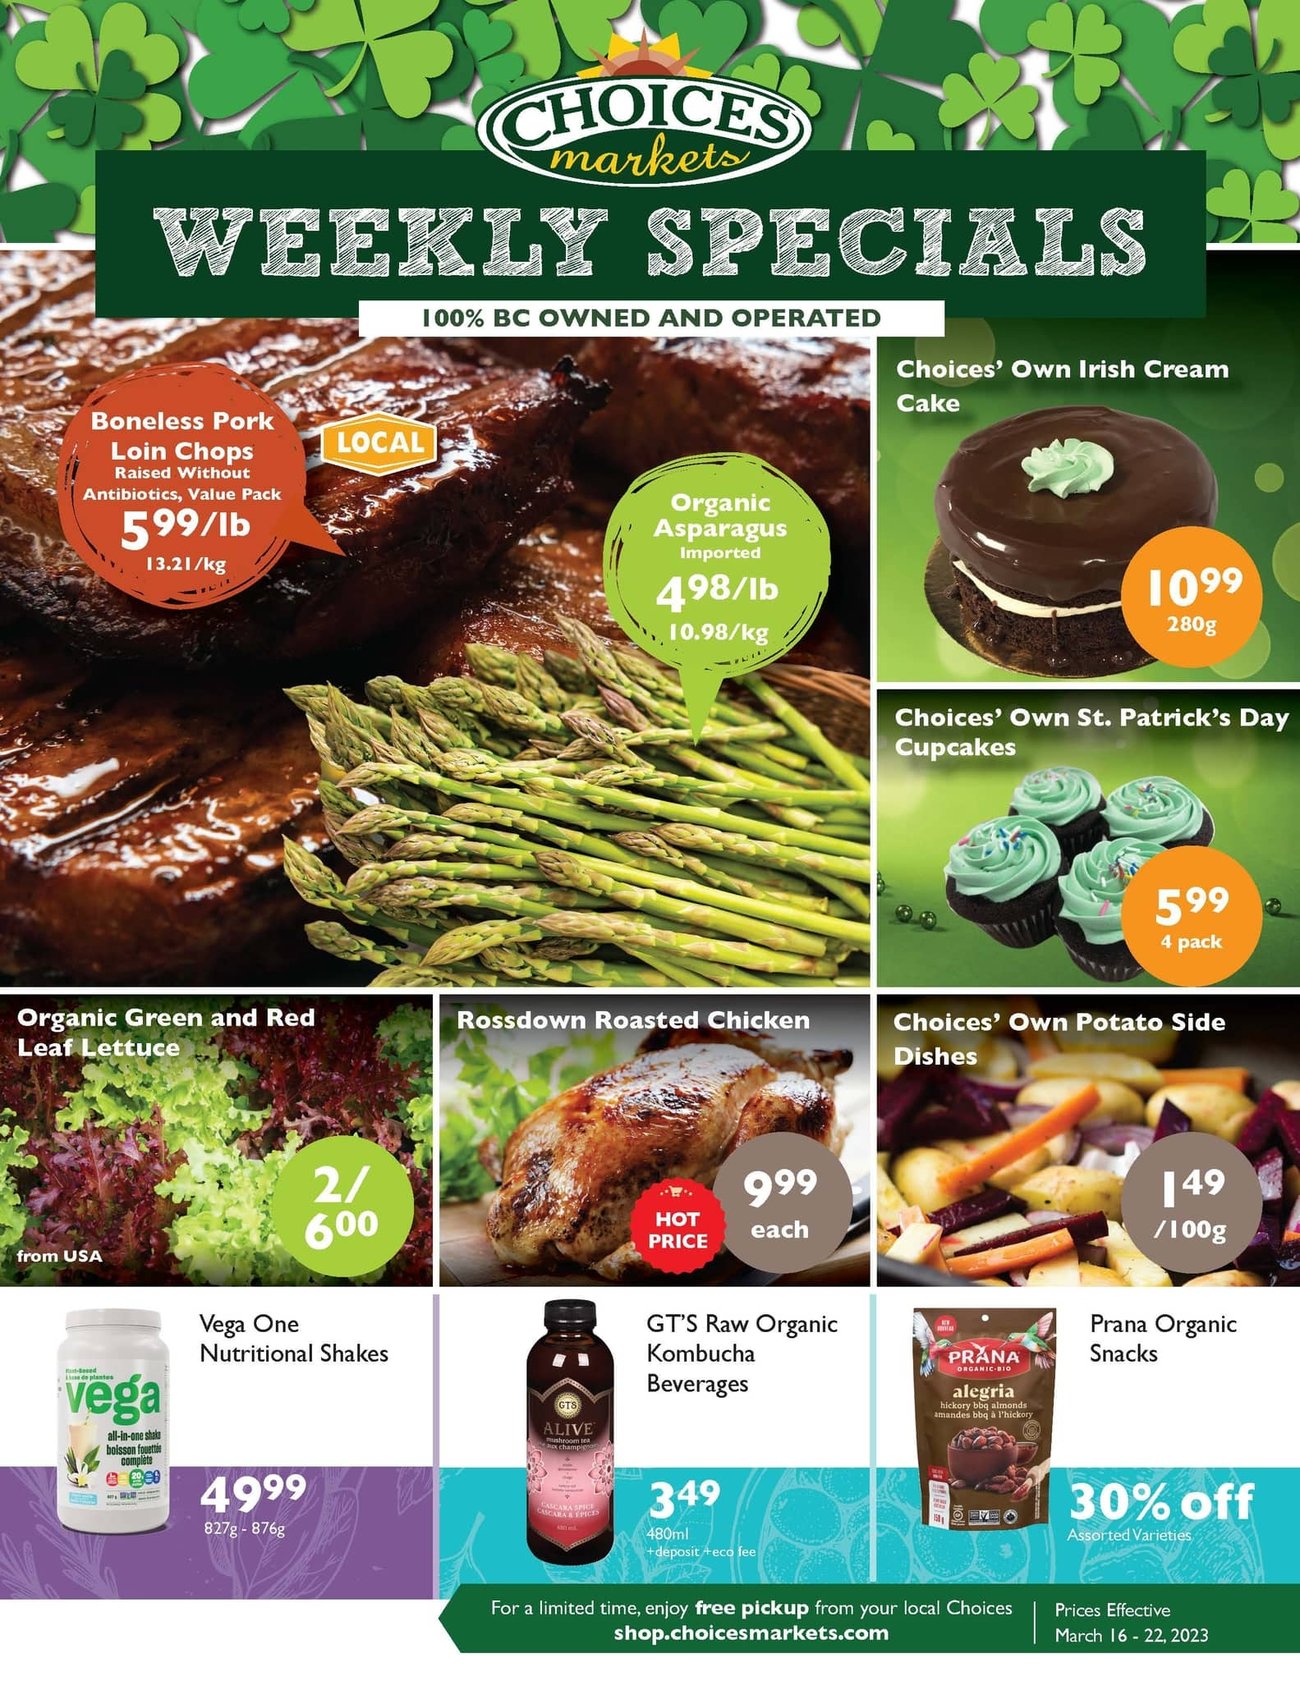 Choices Markets - Weekly Flyer Specials - Page 1